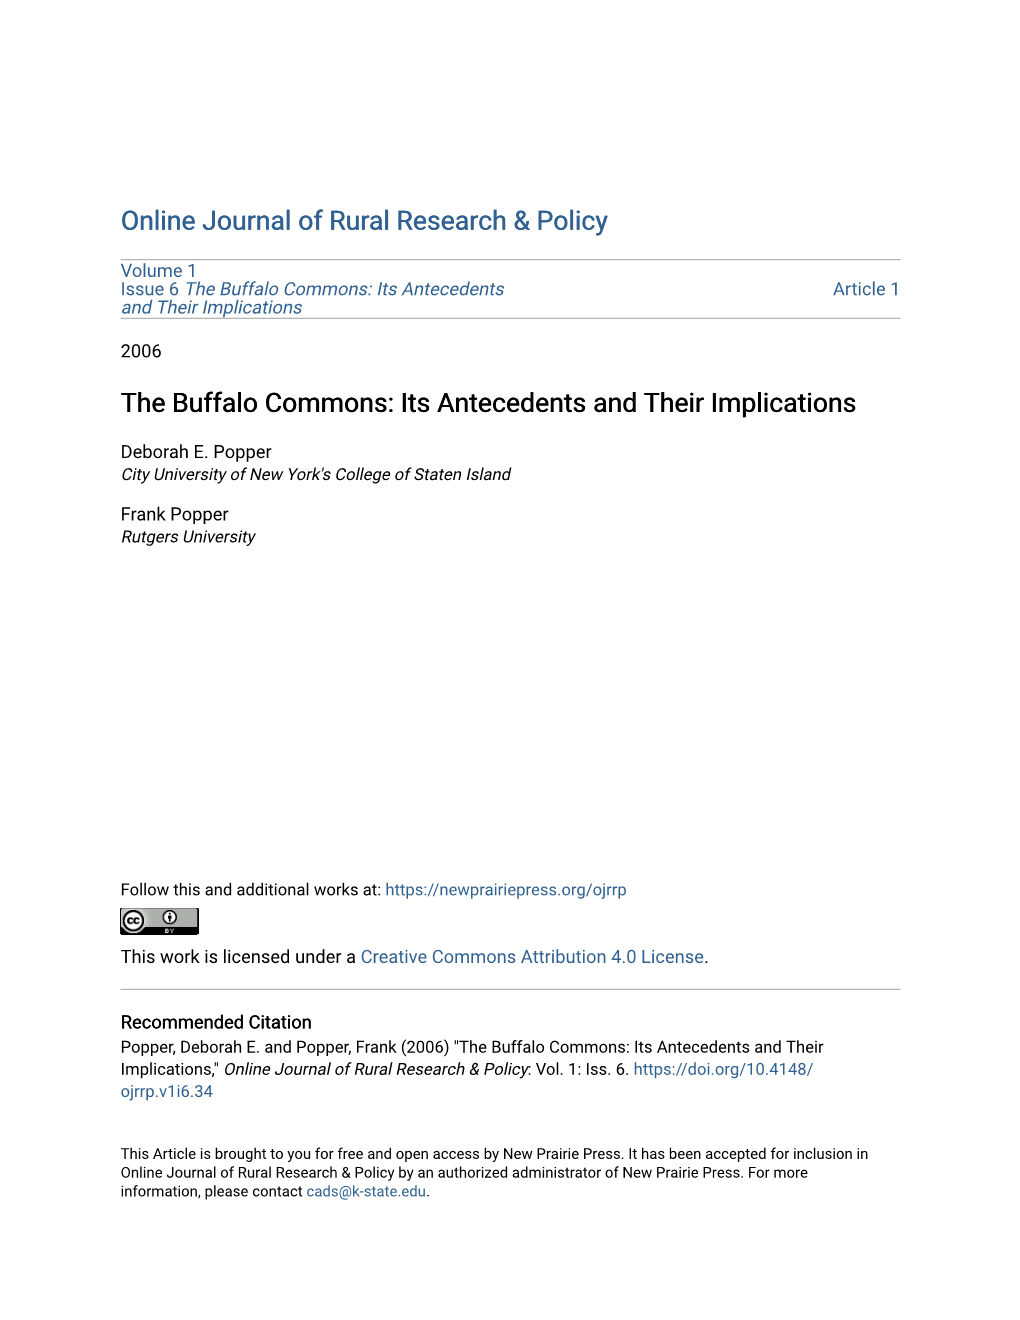 The Buffalo Commons: Its Antecedents and Their Implications